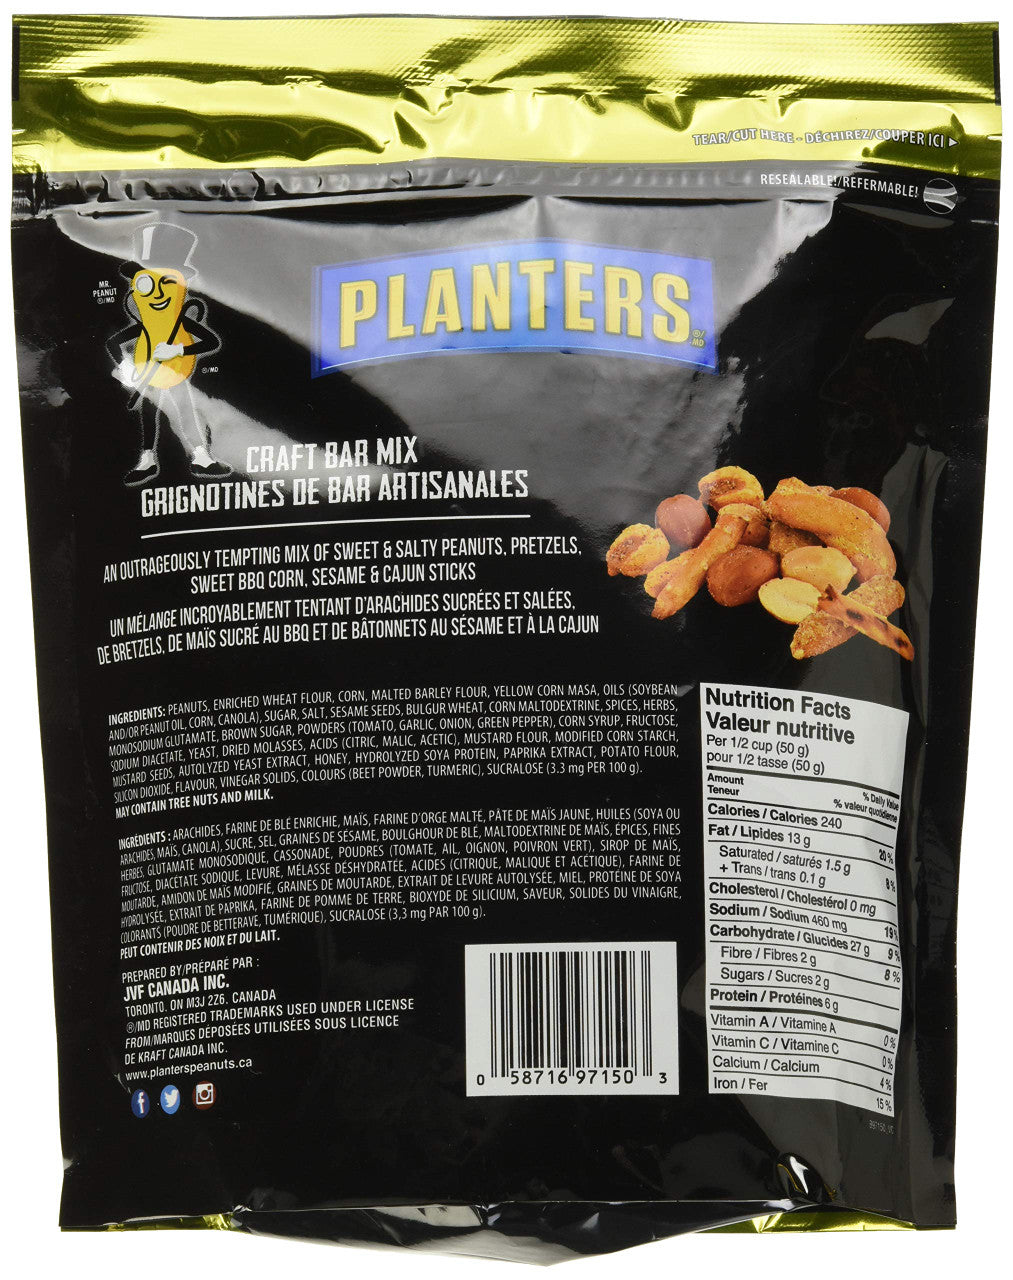 Planters Peanuts, Craft Bar Mix, 550g/19.4 oz., {Imported from Canada}